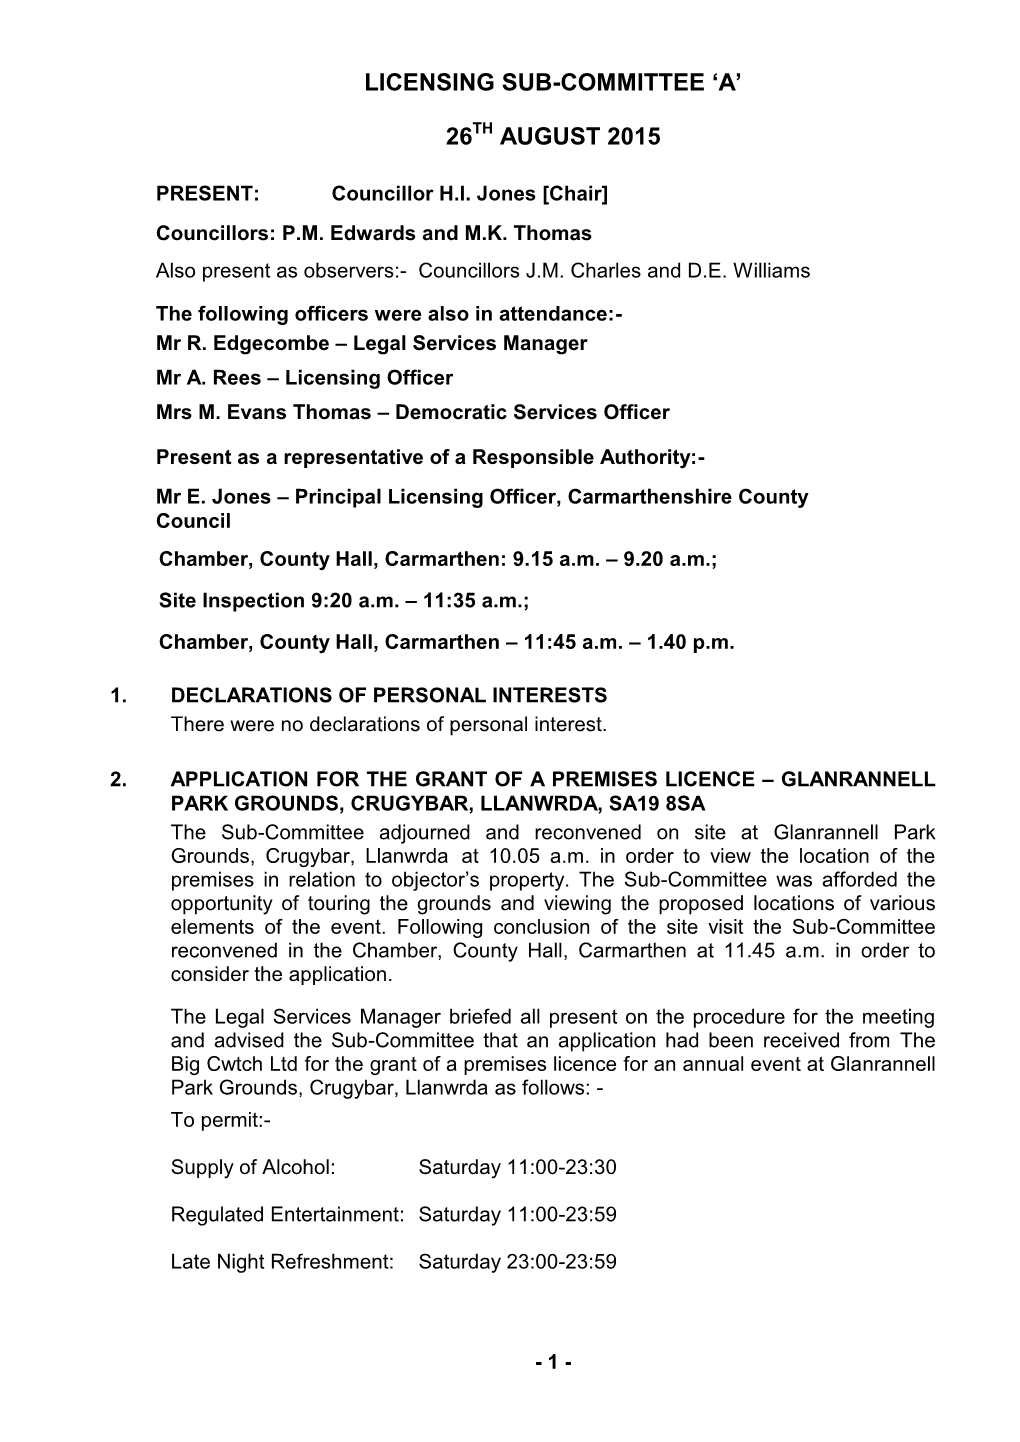 Licensing Sub-Committee 'A' 26 August 2015